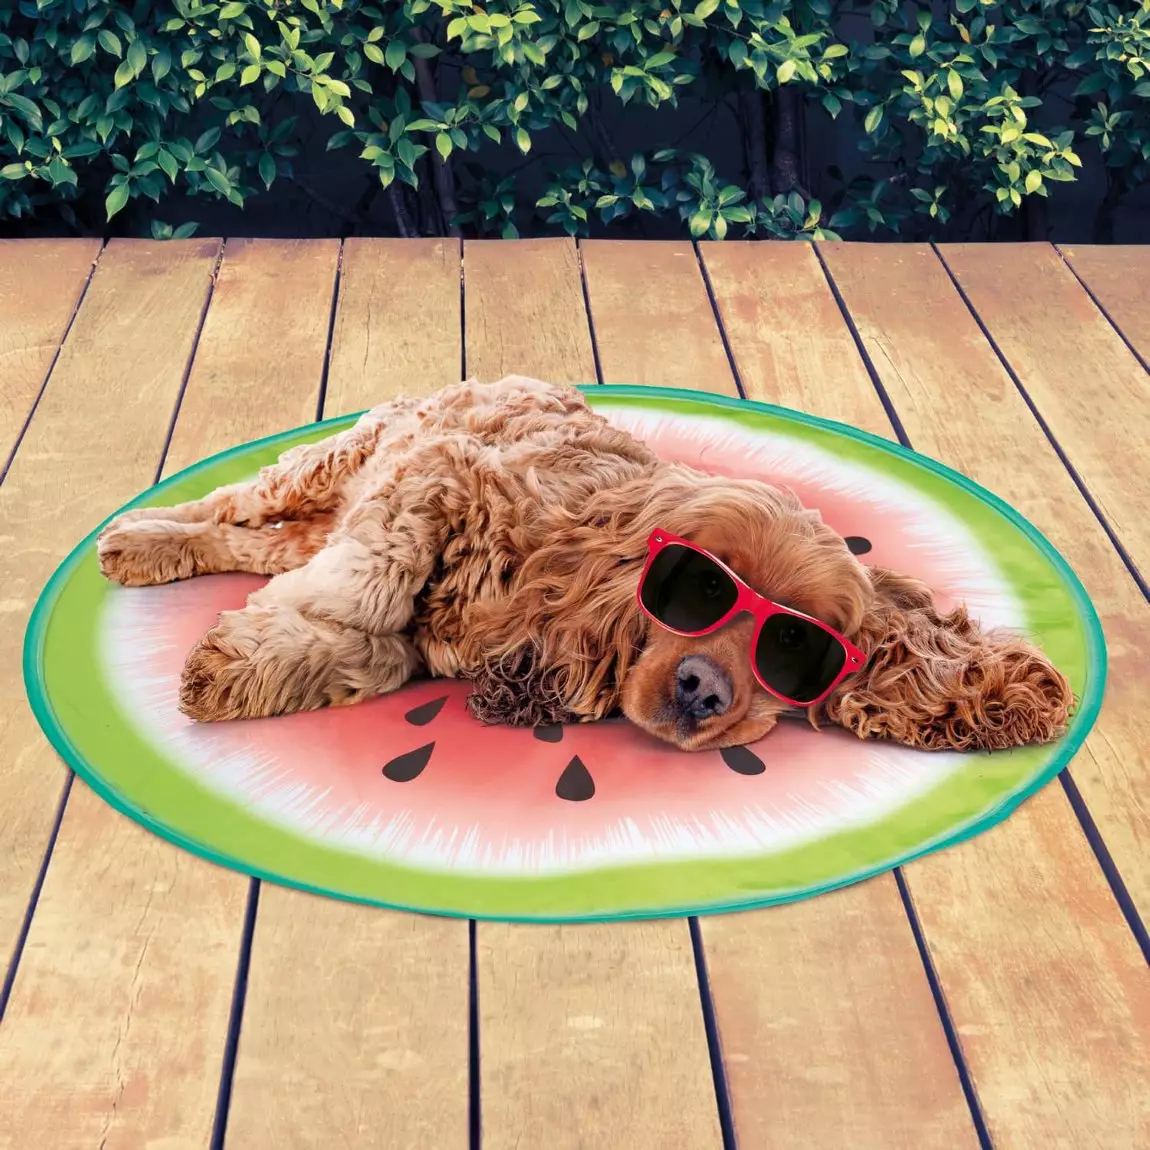 You can also get fruit-shaped mats for slightly cheaper (